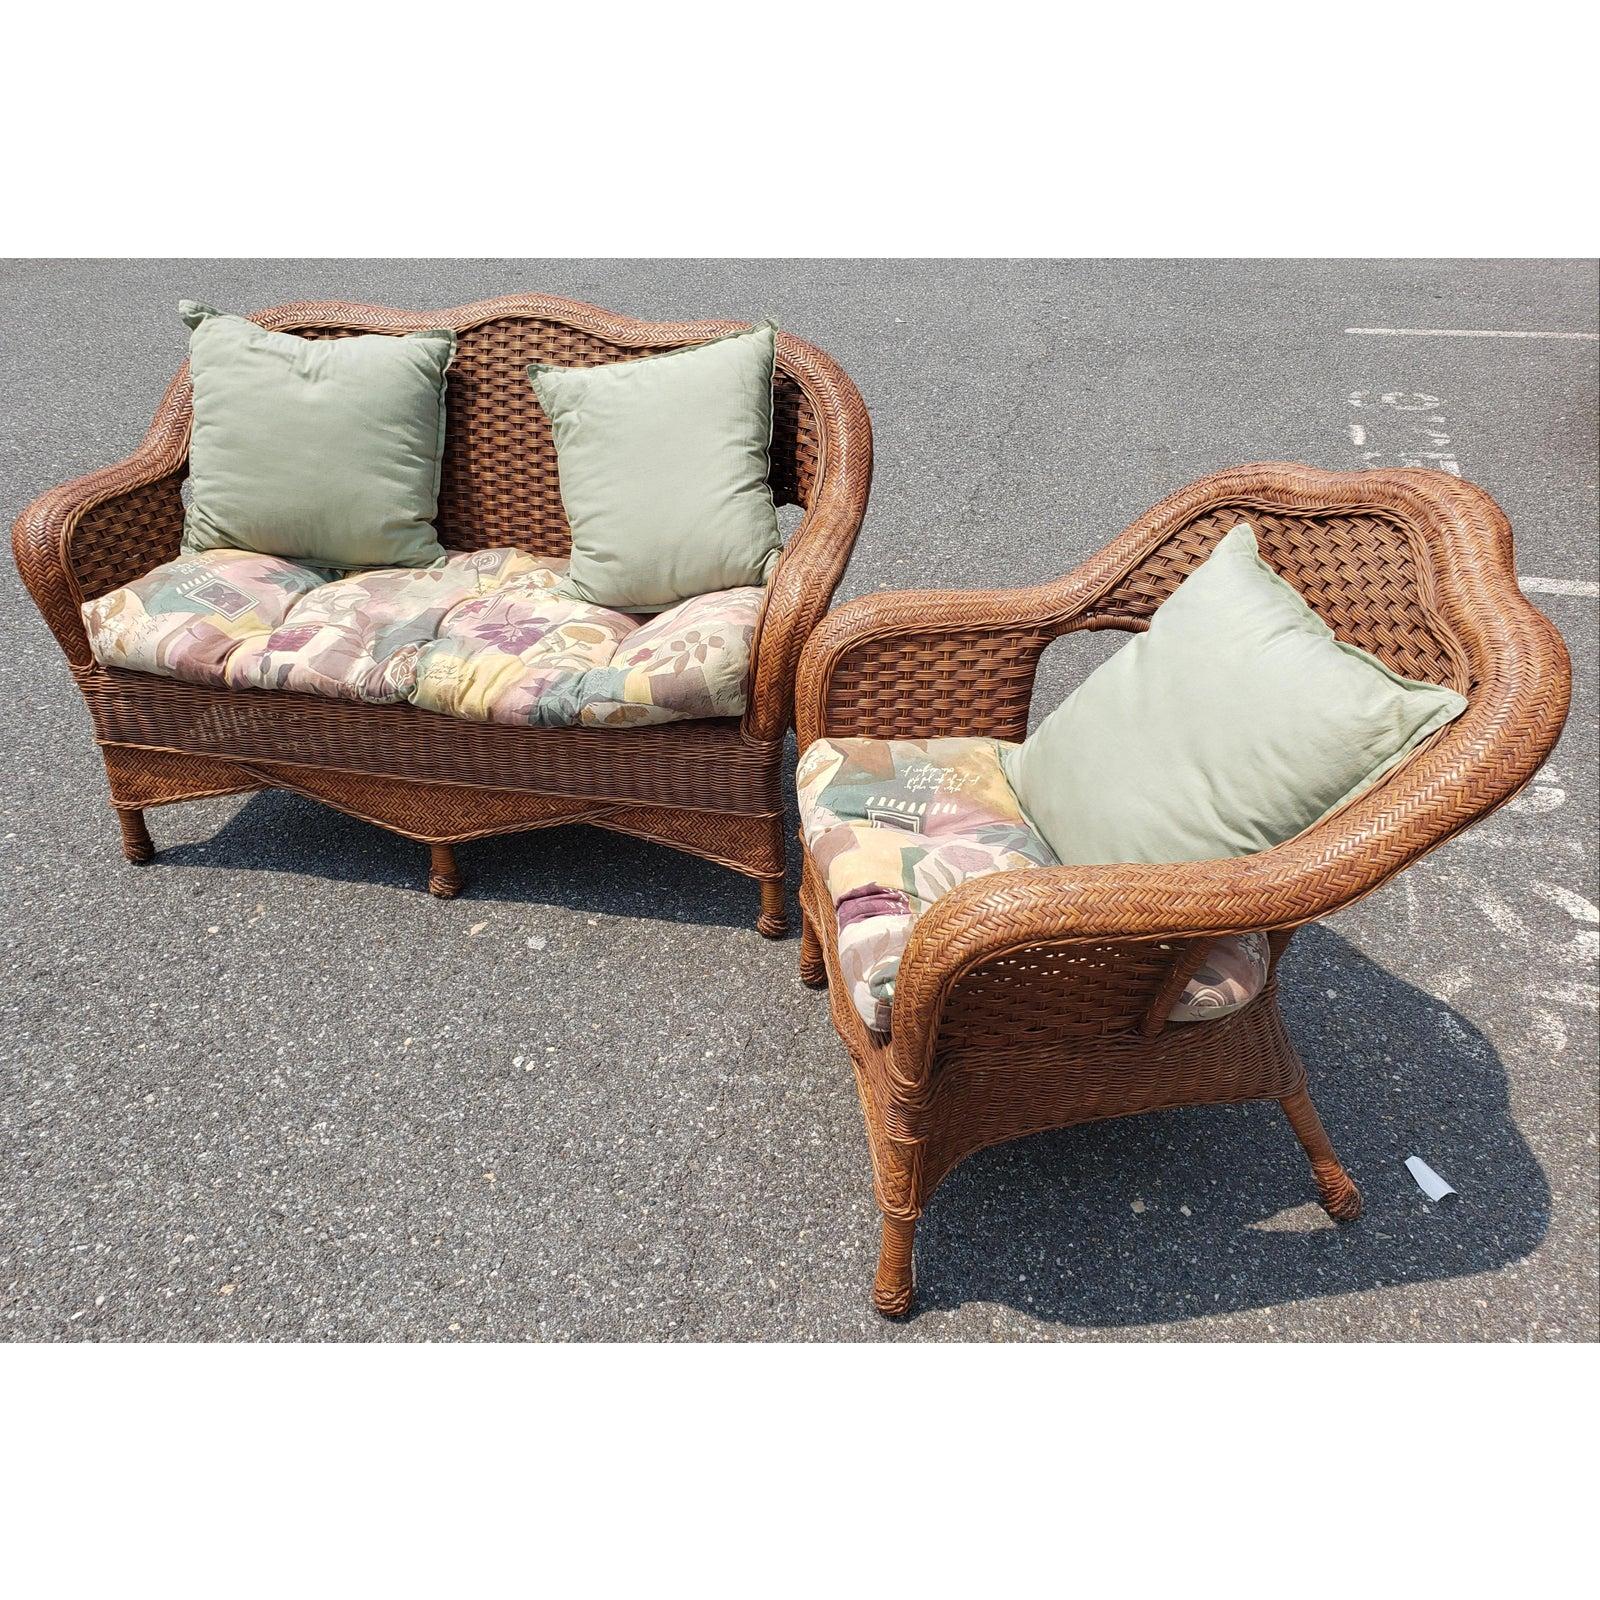 Fabric 1960s Vintage Wicker Rattan Loveseat and Chair Set in Floral Upholstery, 2 Pieces